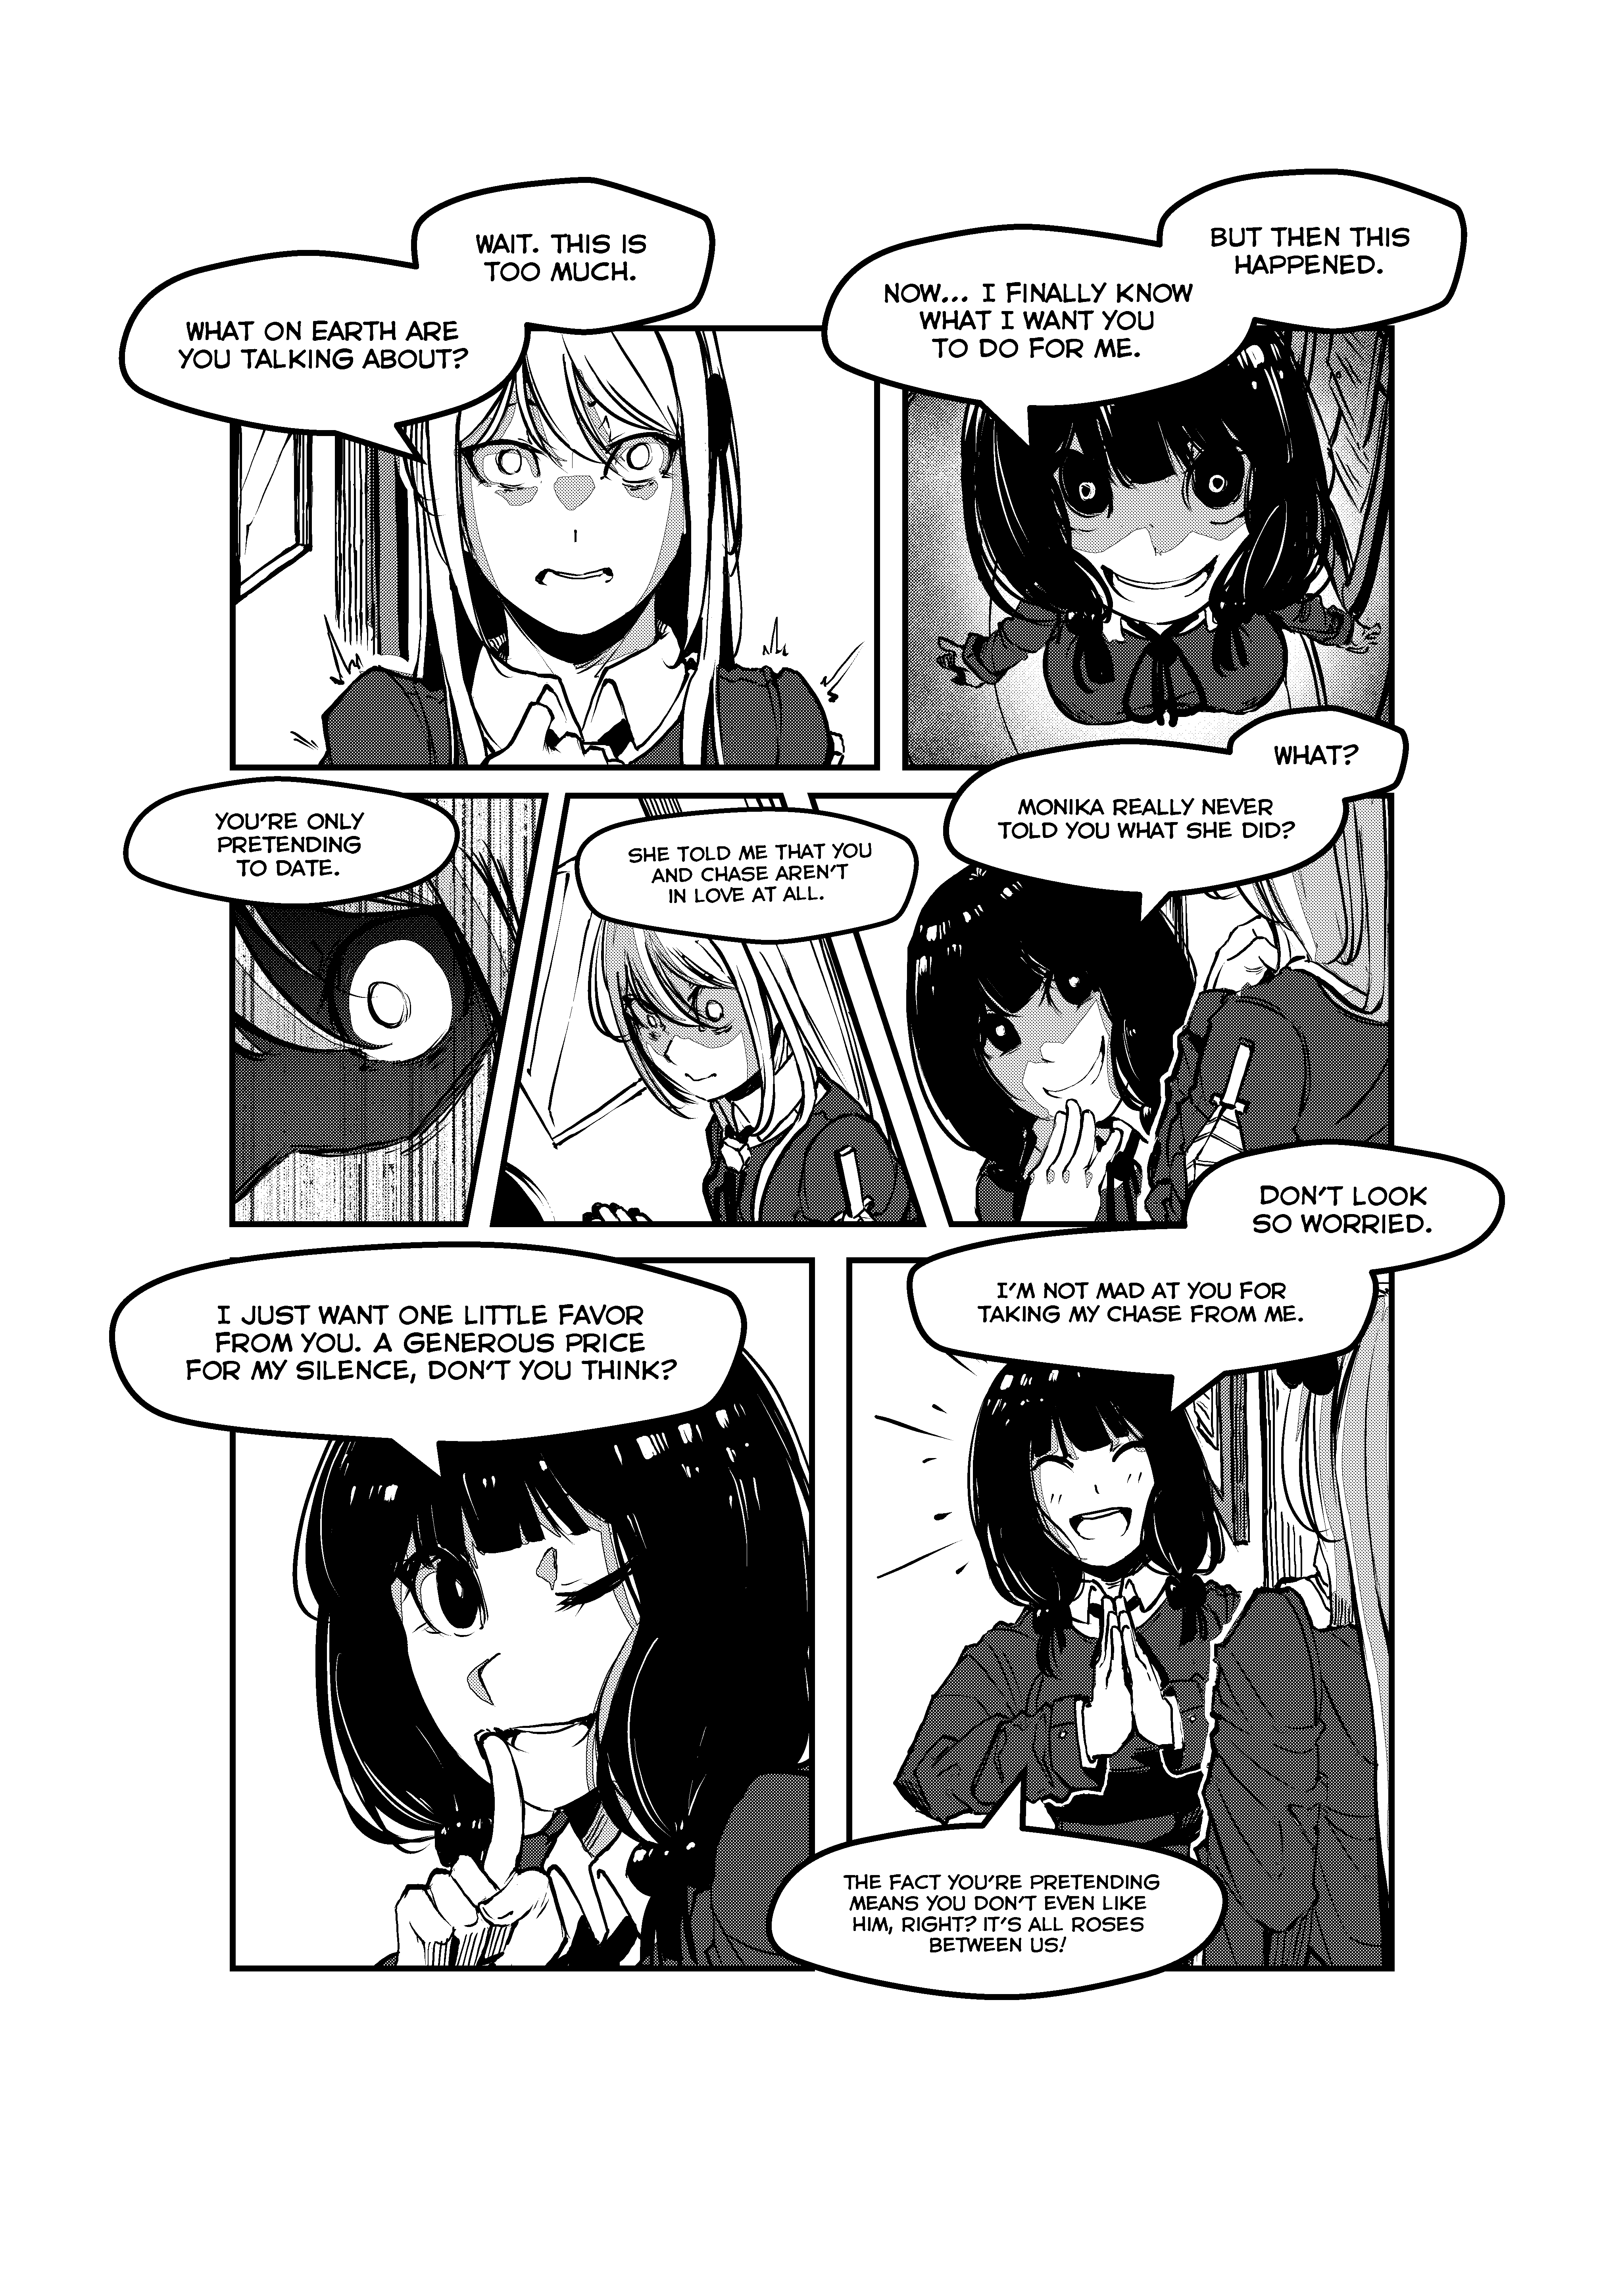 Opposites In Disguise - 21 page 11-6f94f2d3